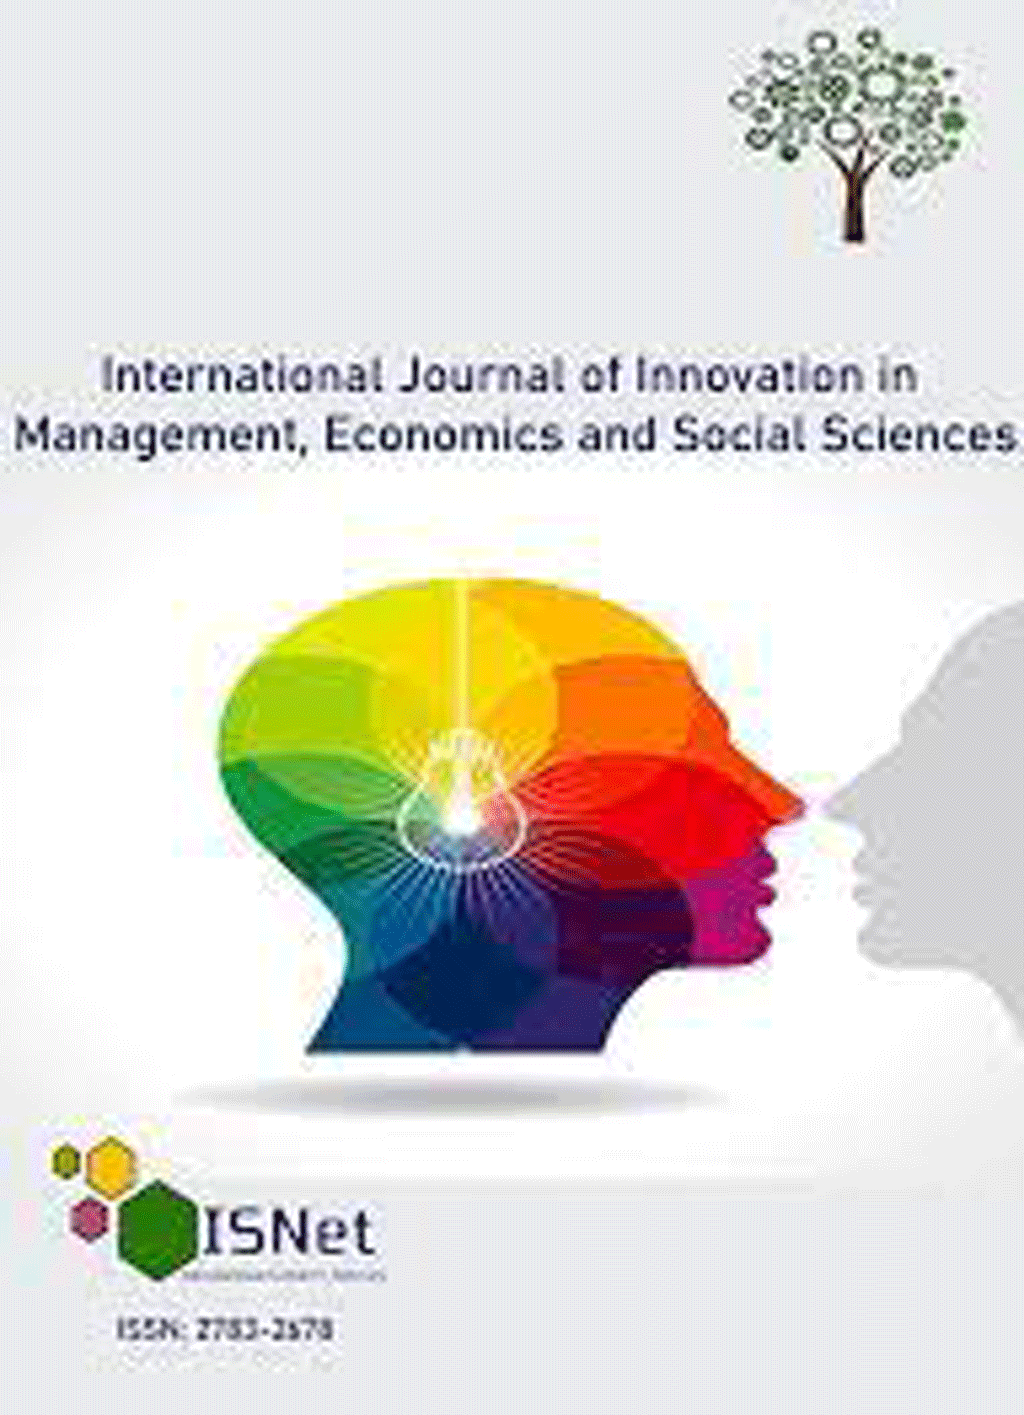 Innovation in Management, Economics and Social Sciences - Winter 2021 - Number 1